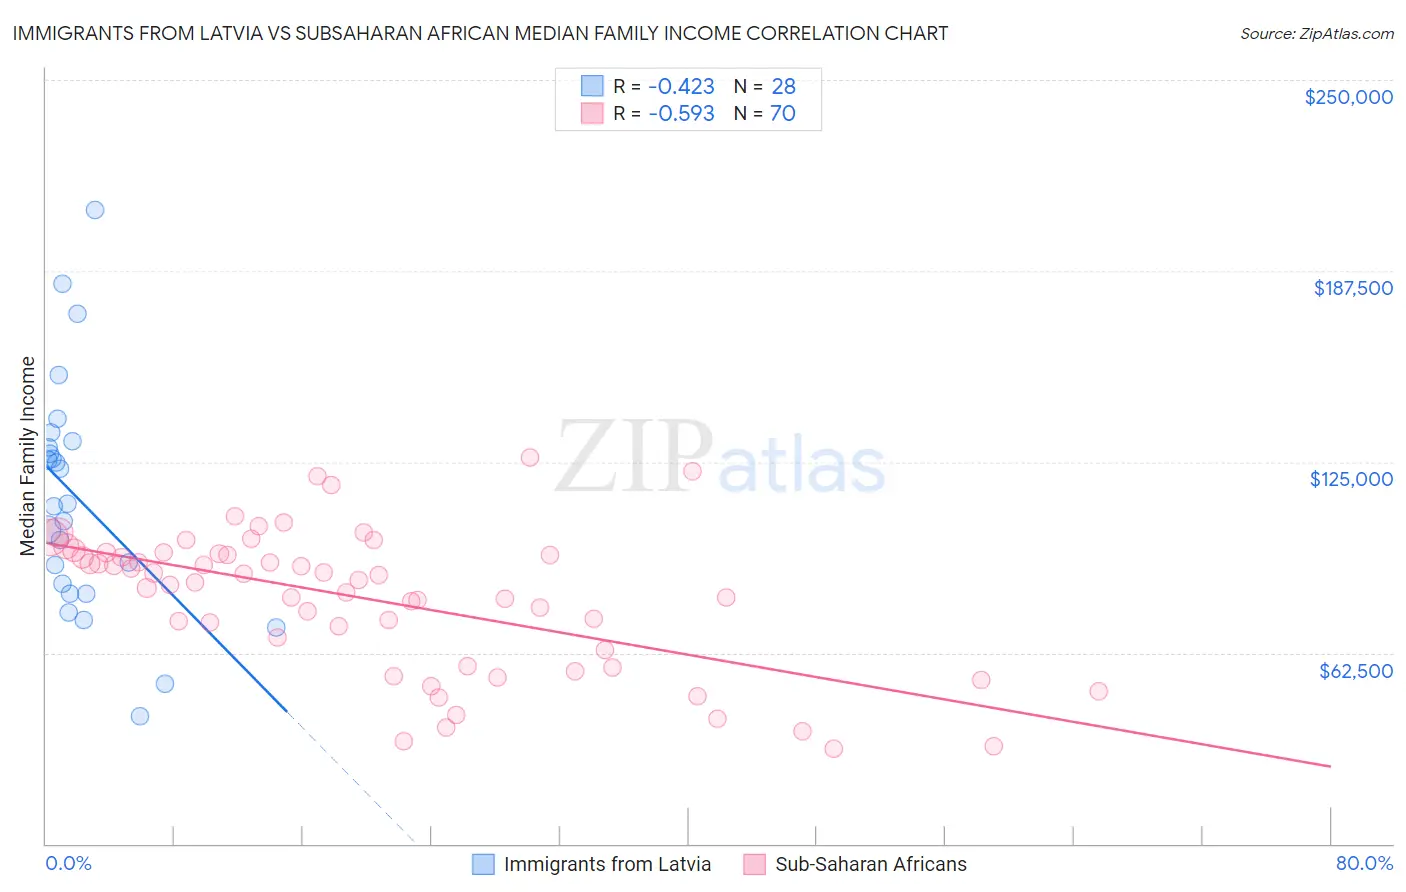 Immigrants from Latvia vs Subsaharan African Median Family Income